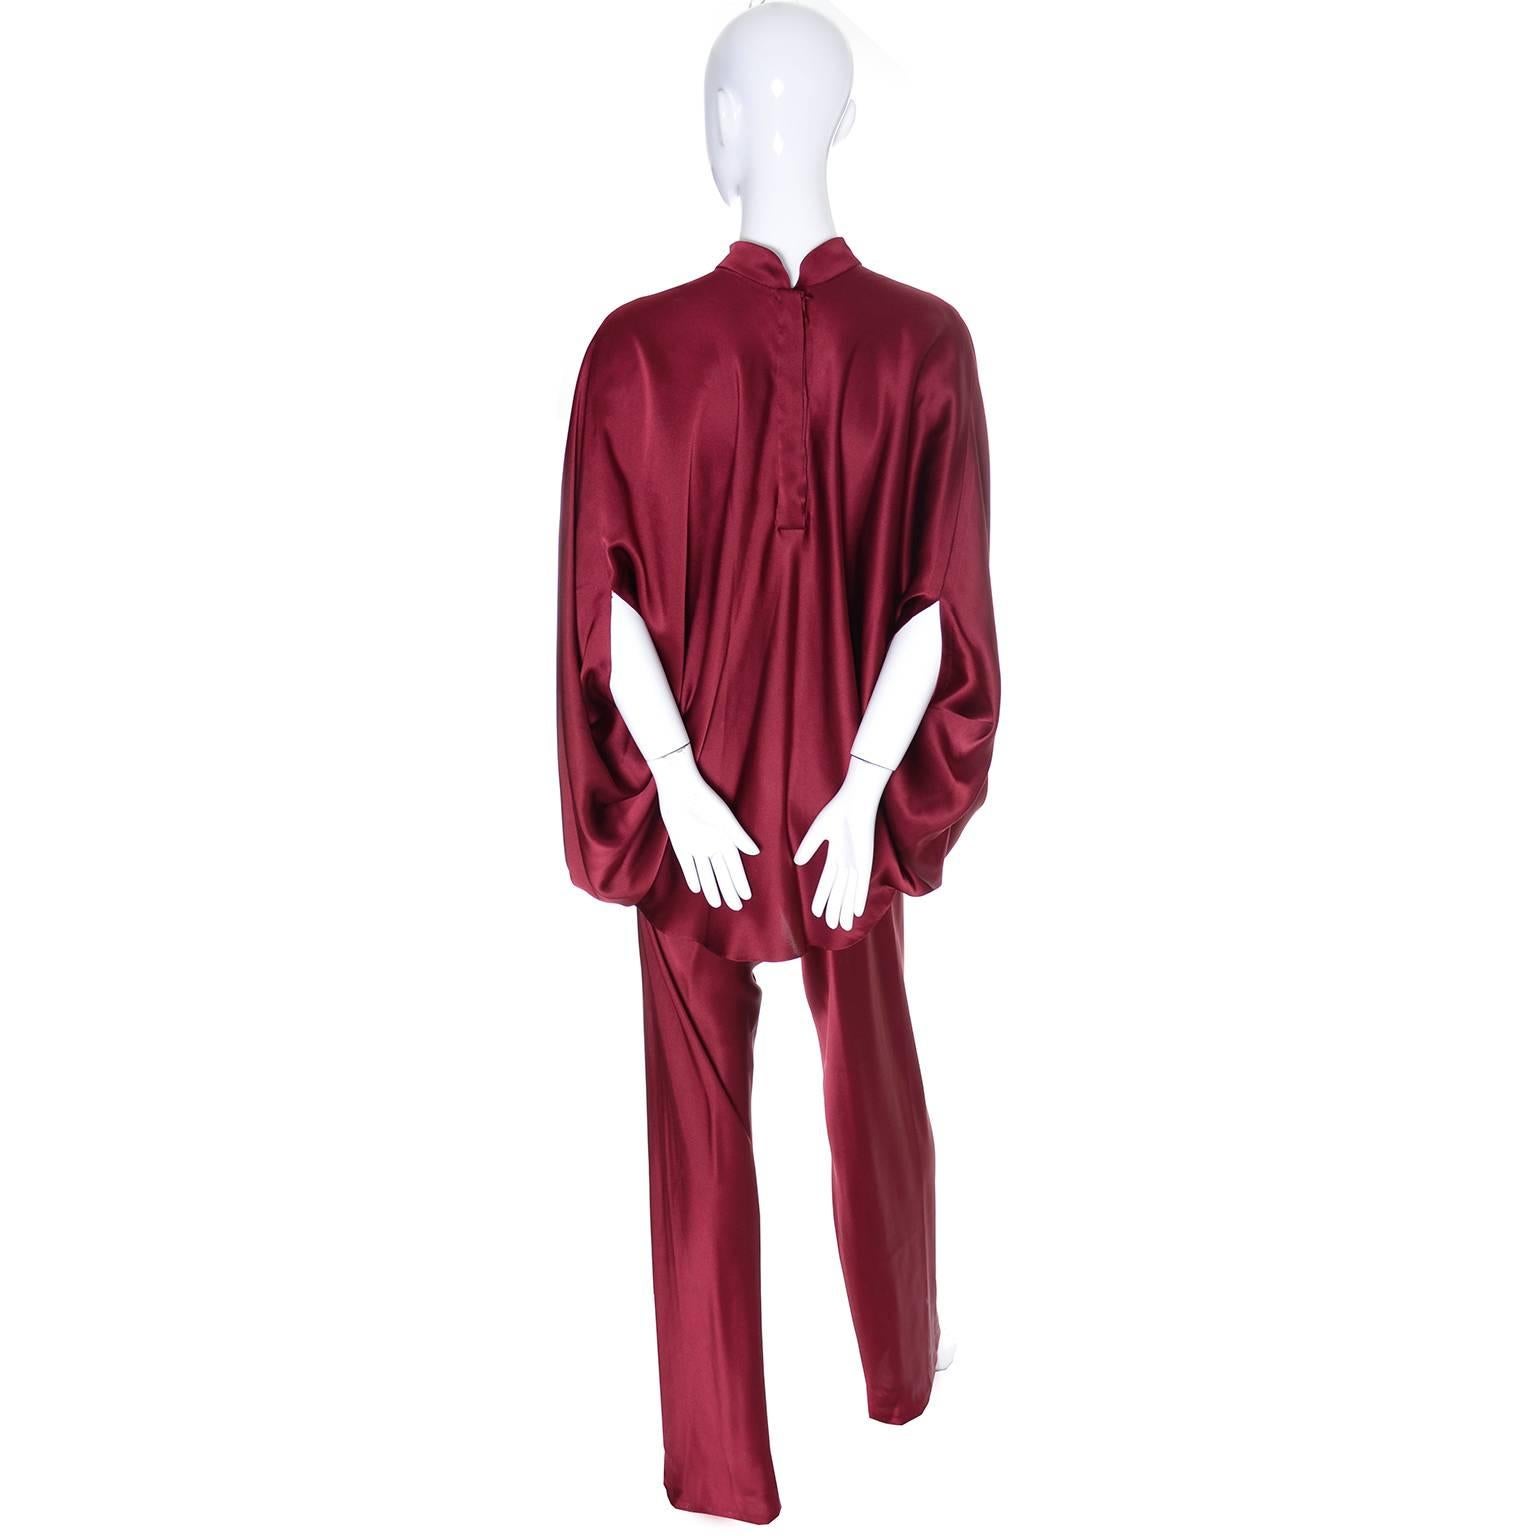 Red 1970s George Stavropoulos Vintage Evening Outfit w Pants & Top in Burgundy Silk